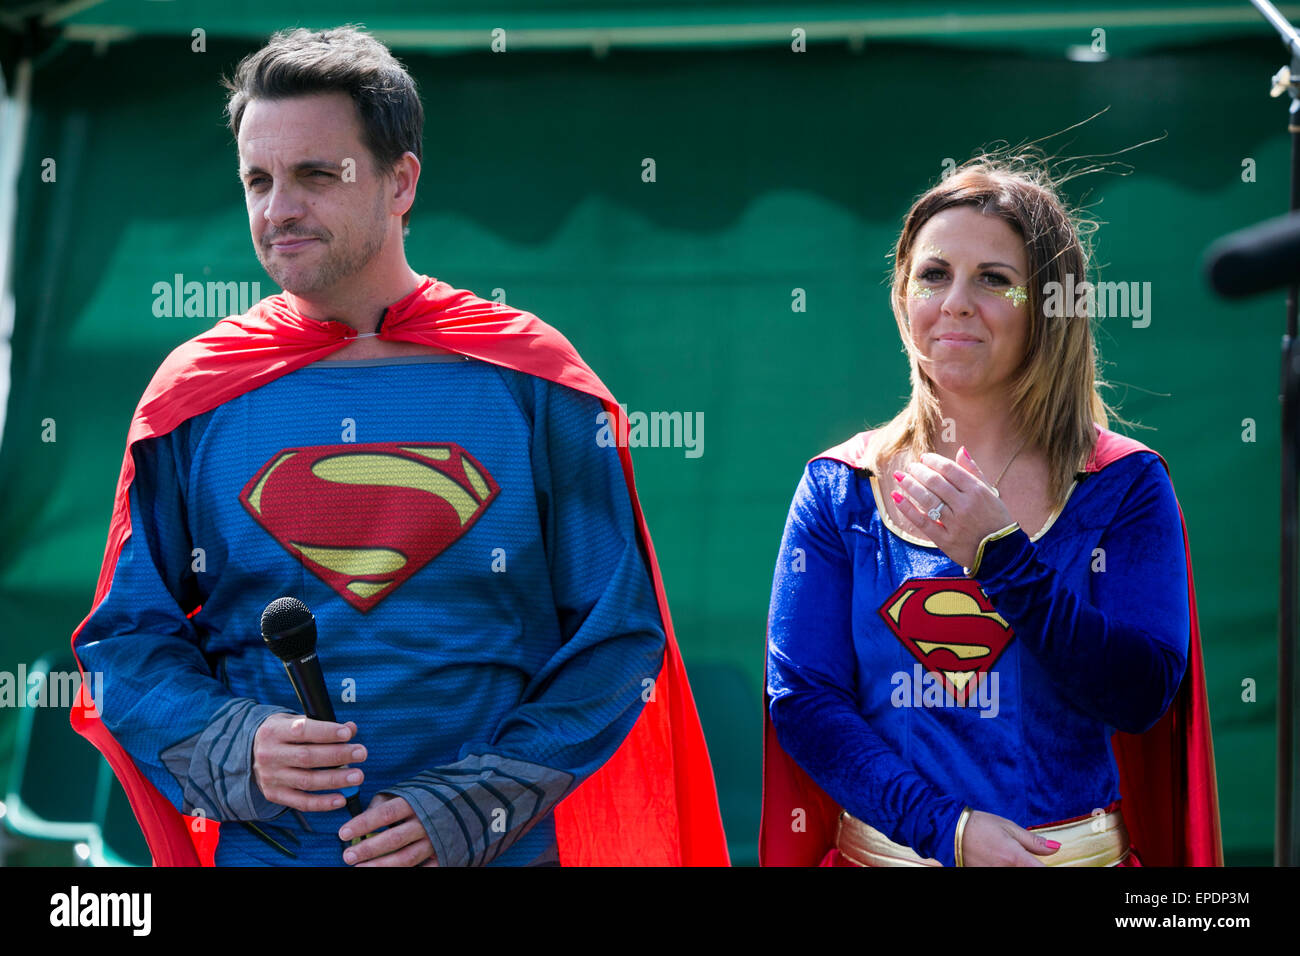 DJs Mike Toolan and Chelsea Norris at St Bede's School , Manchester on charity Superhero day. Stock Photo